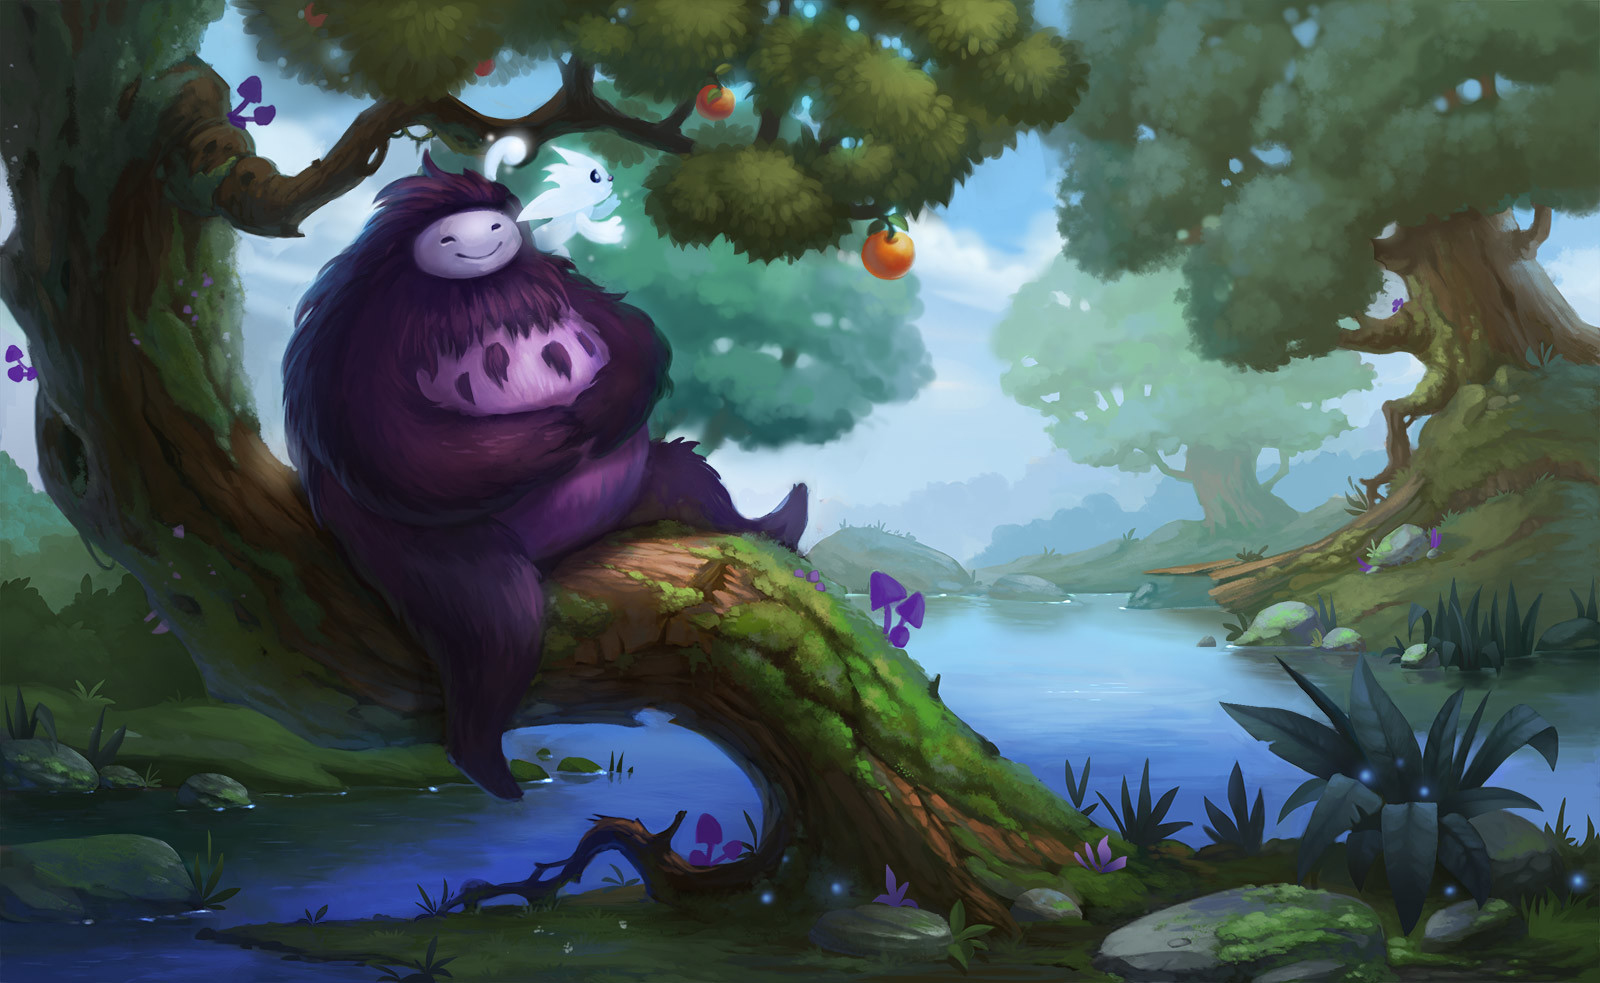 Ori and the Blind Forest Art by Anna Lepeshkina